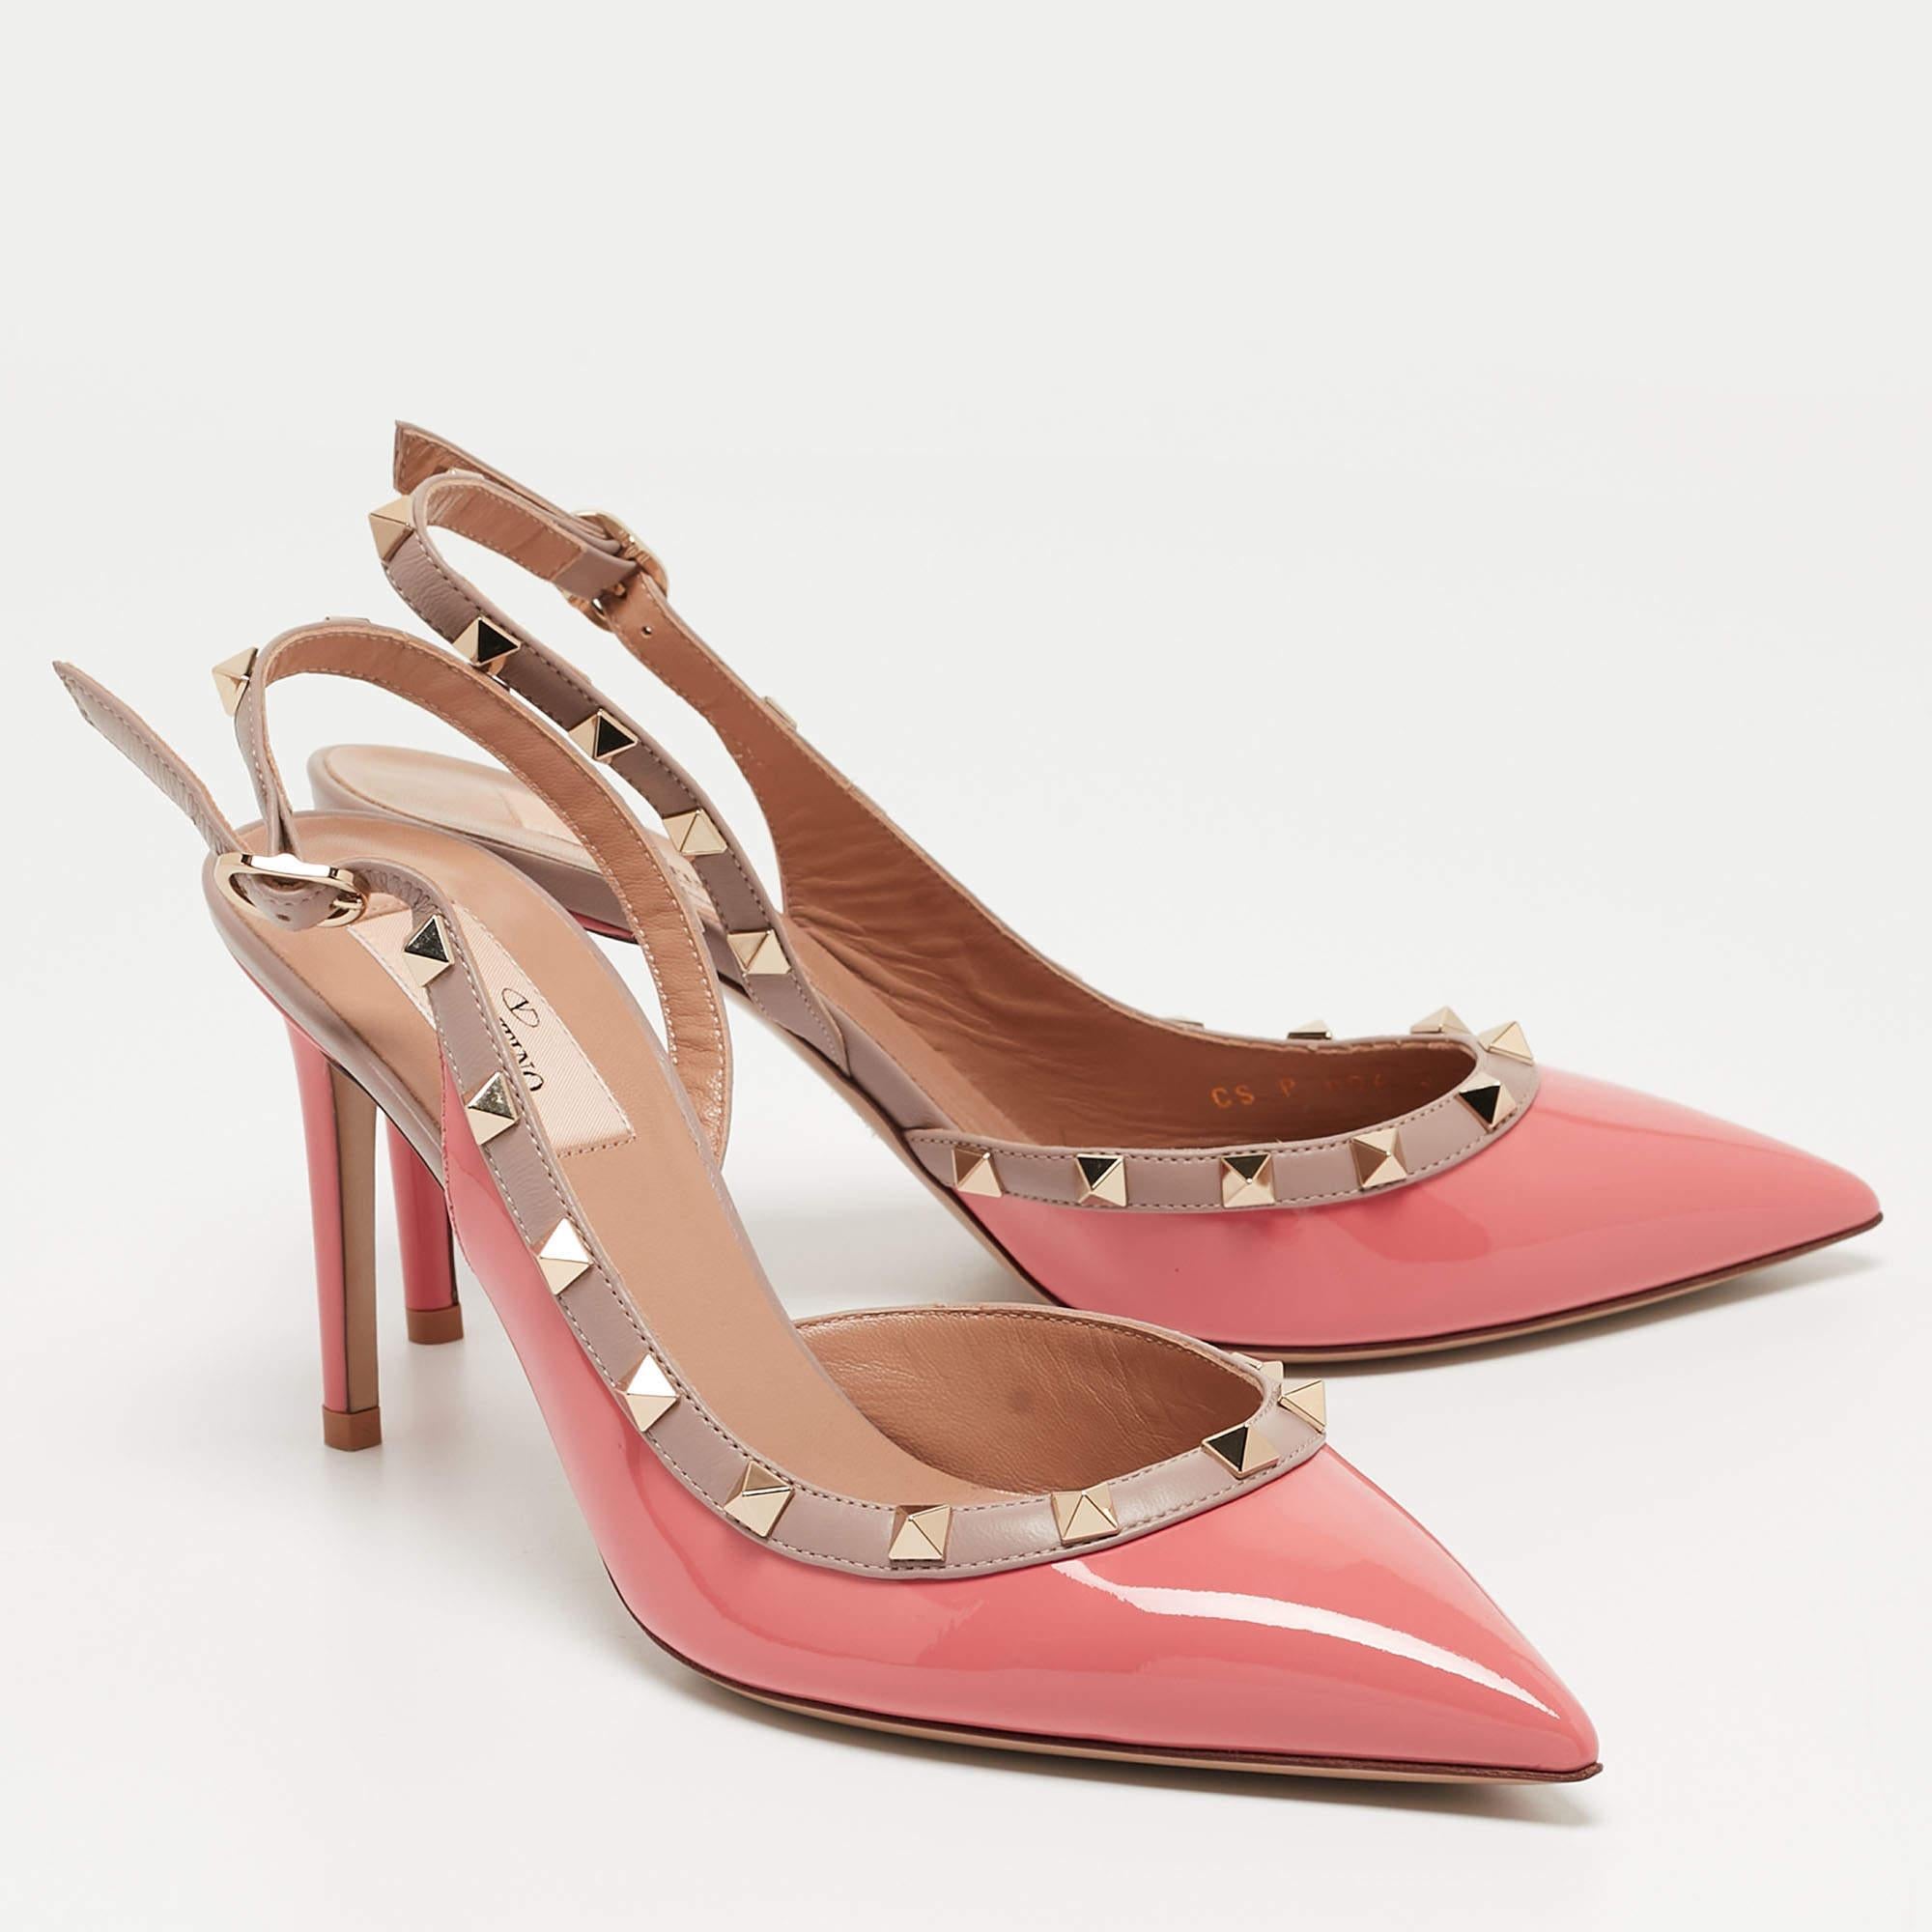 Valentino Pink Patent and Leather Rockstud Slingback Pumps Size 38.5 4